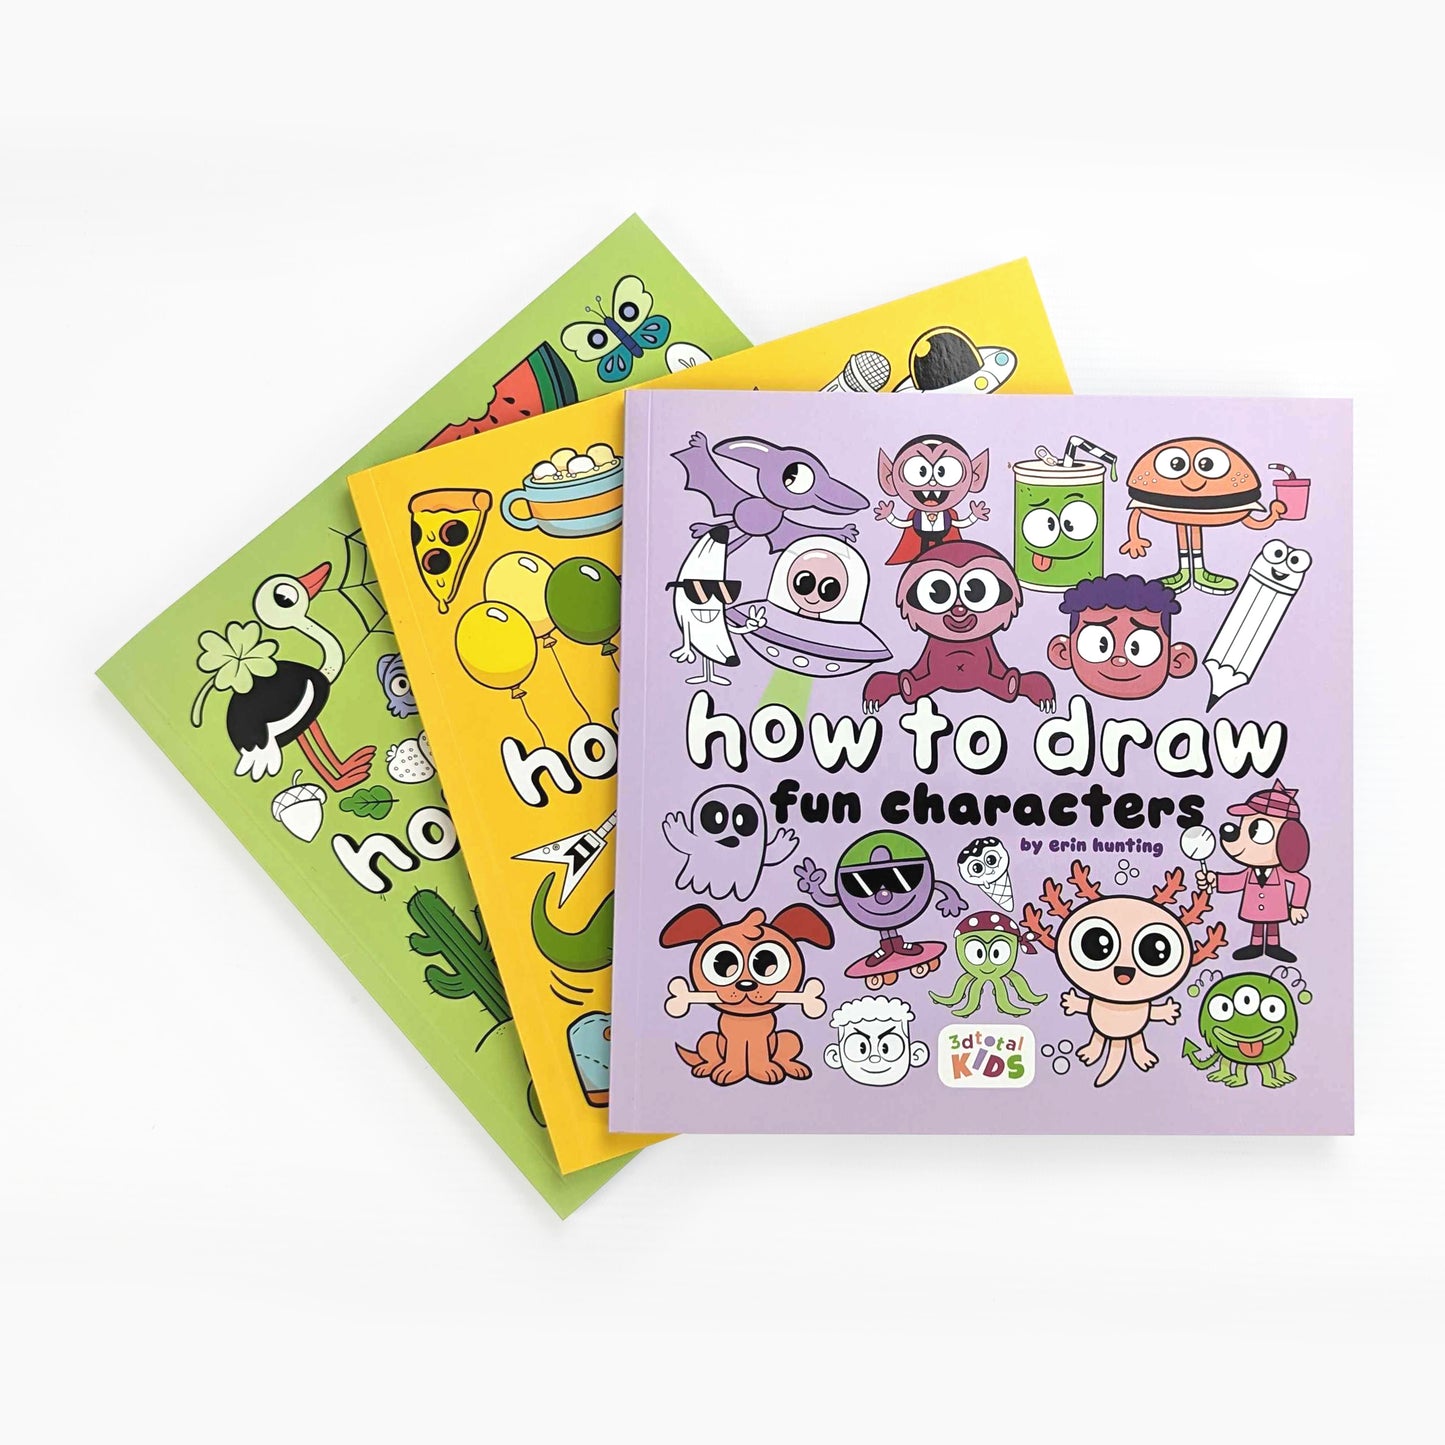 A collection of three books. The covers are green, yellow, and purple, and show a variety of cartoons characters and objects.